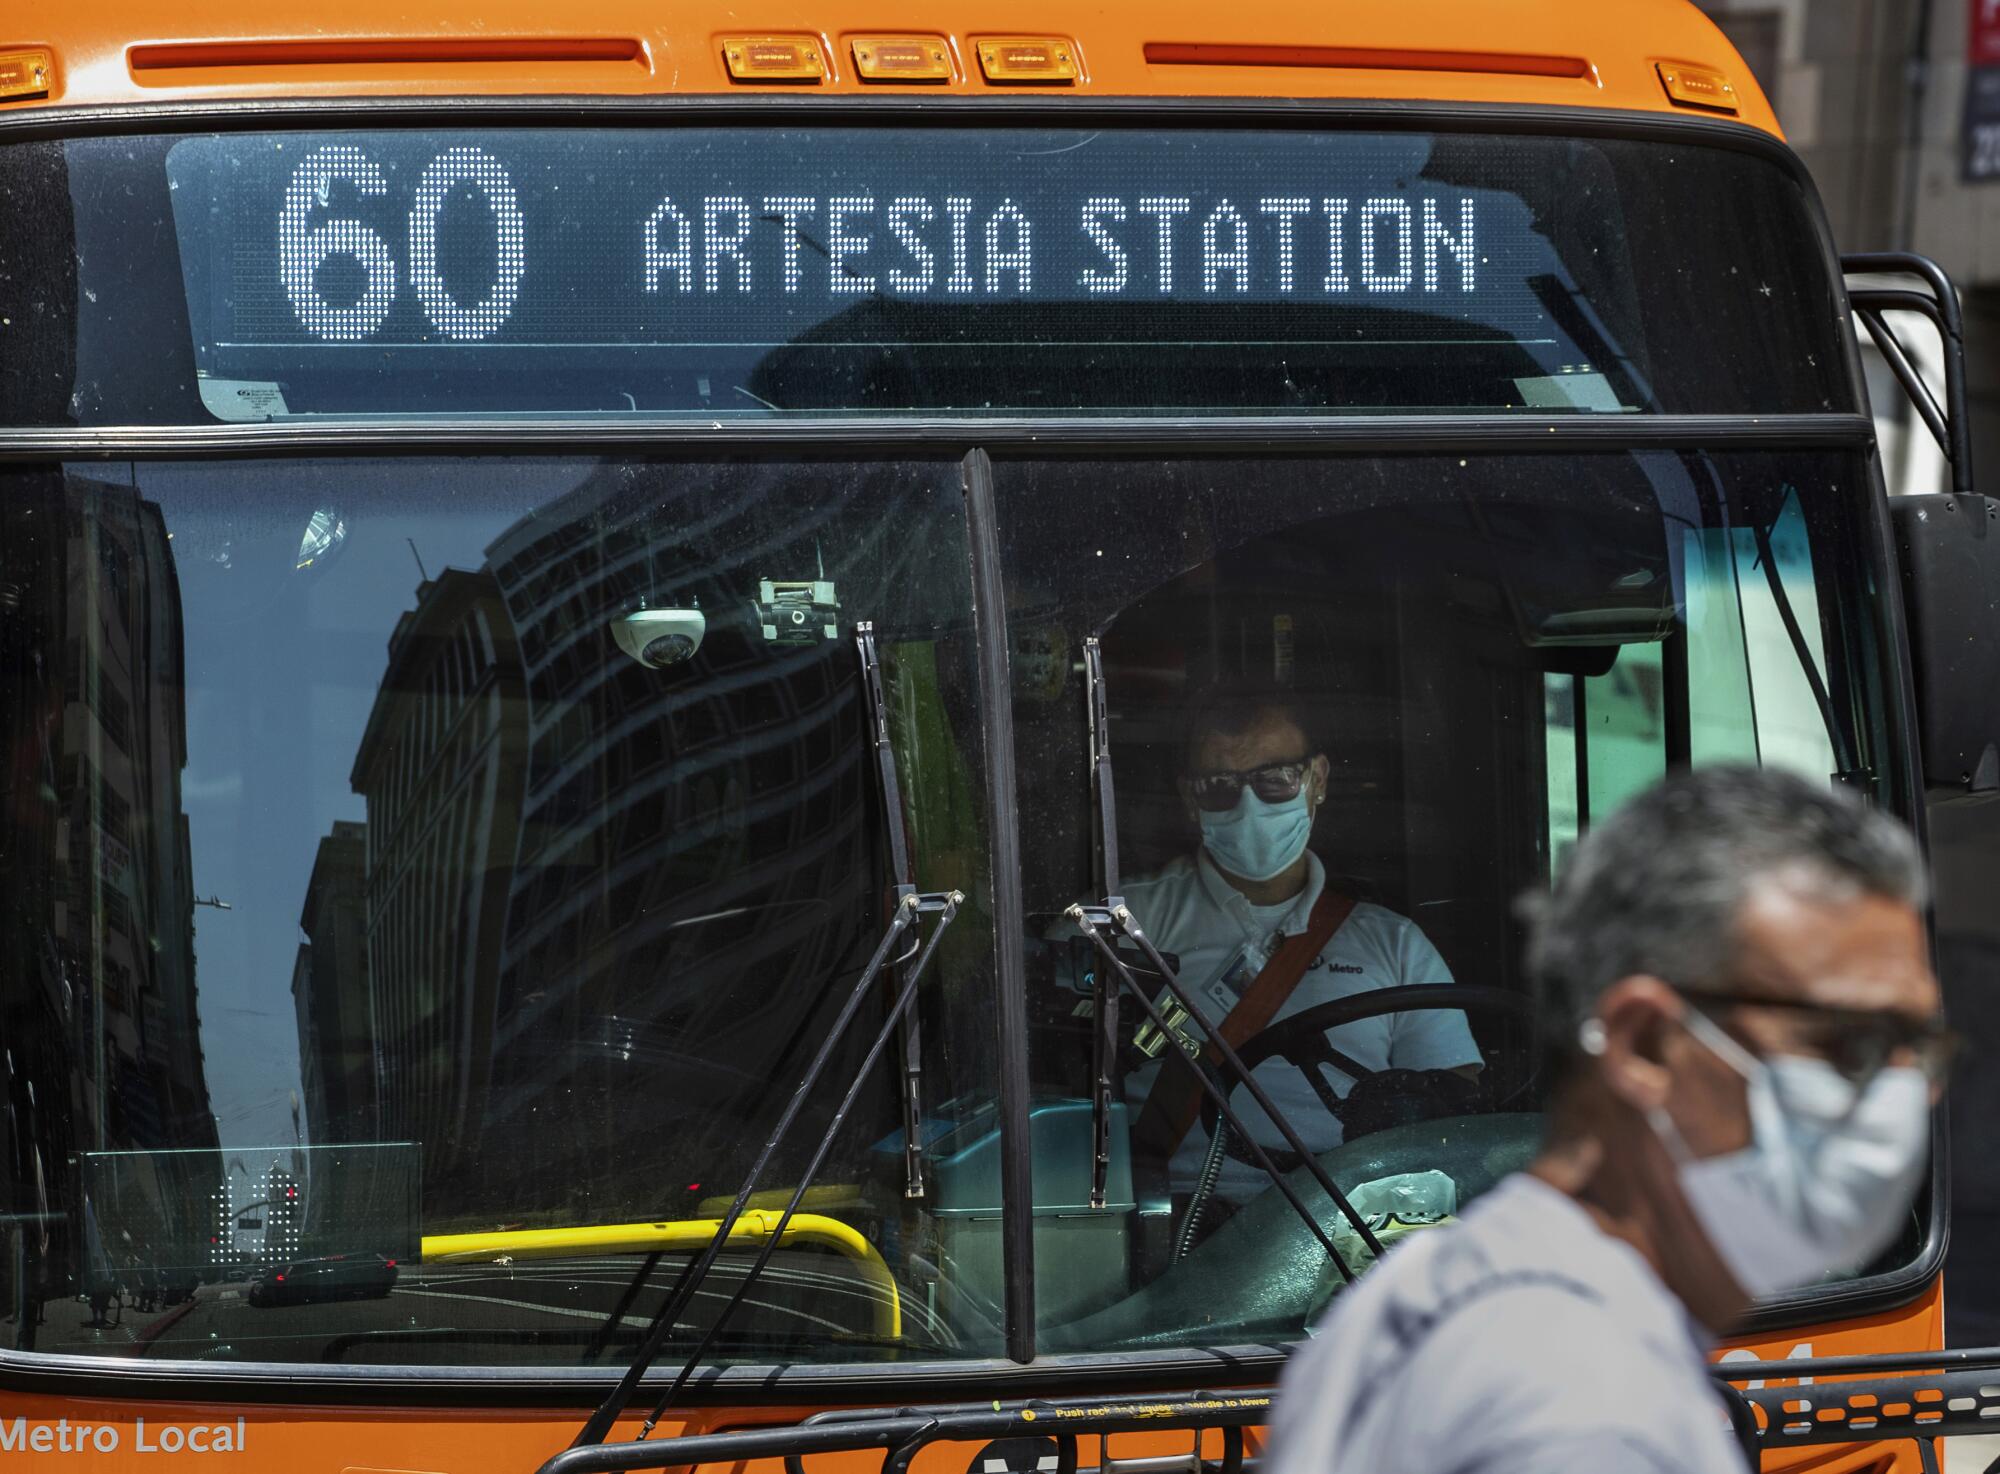 A Metro bus driver waits for passengers to board on 7th Street near Broadway in downtown Los Angeles.